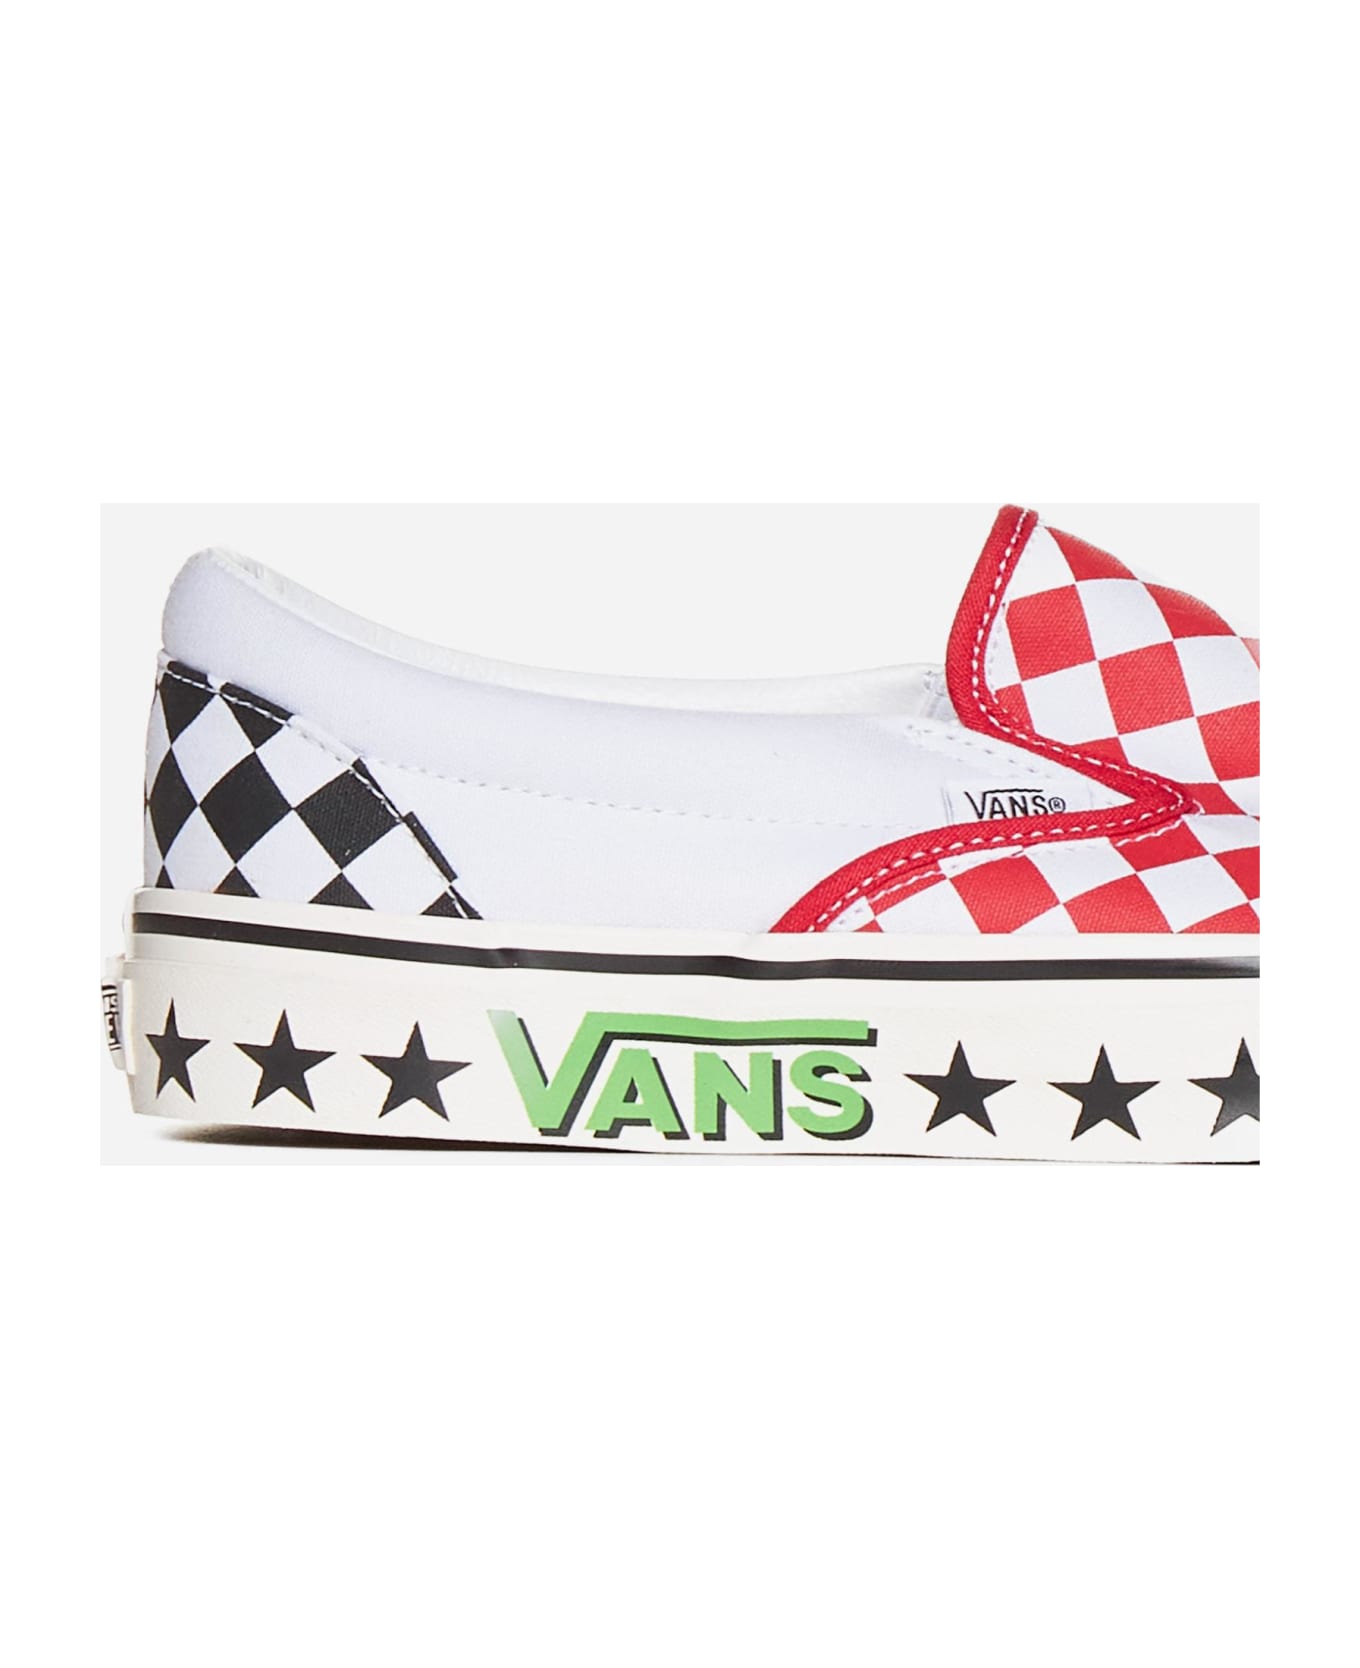 Vans Classic Slip-on 98 Dx Canvas Sneakers - Red/white スニーカー